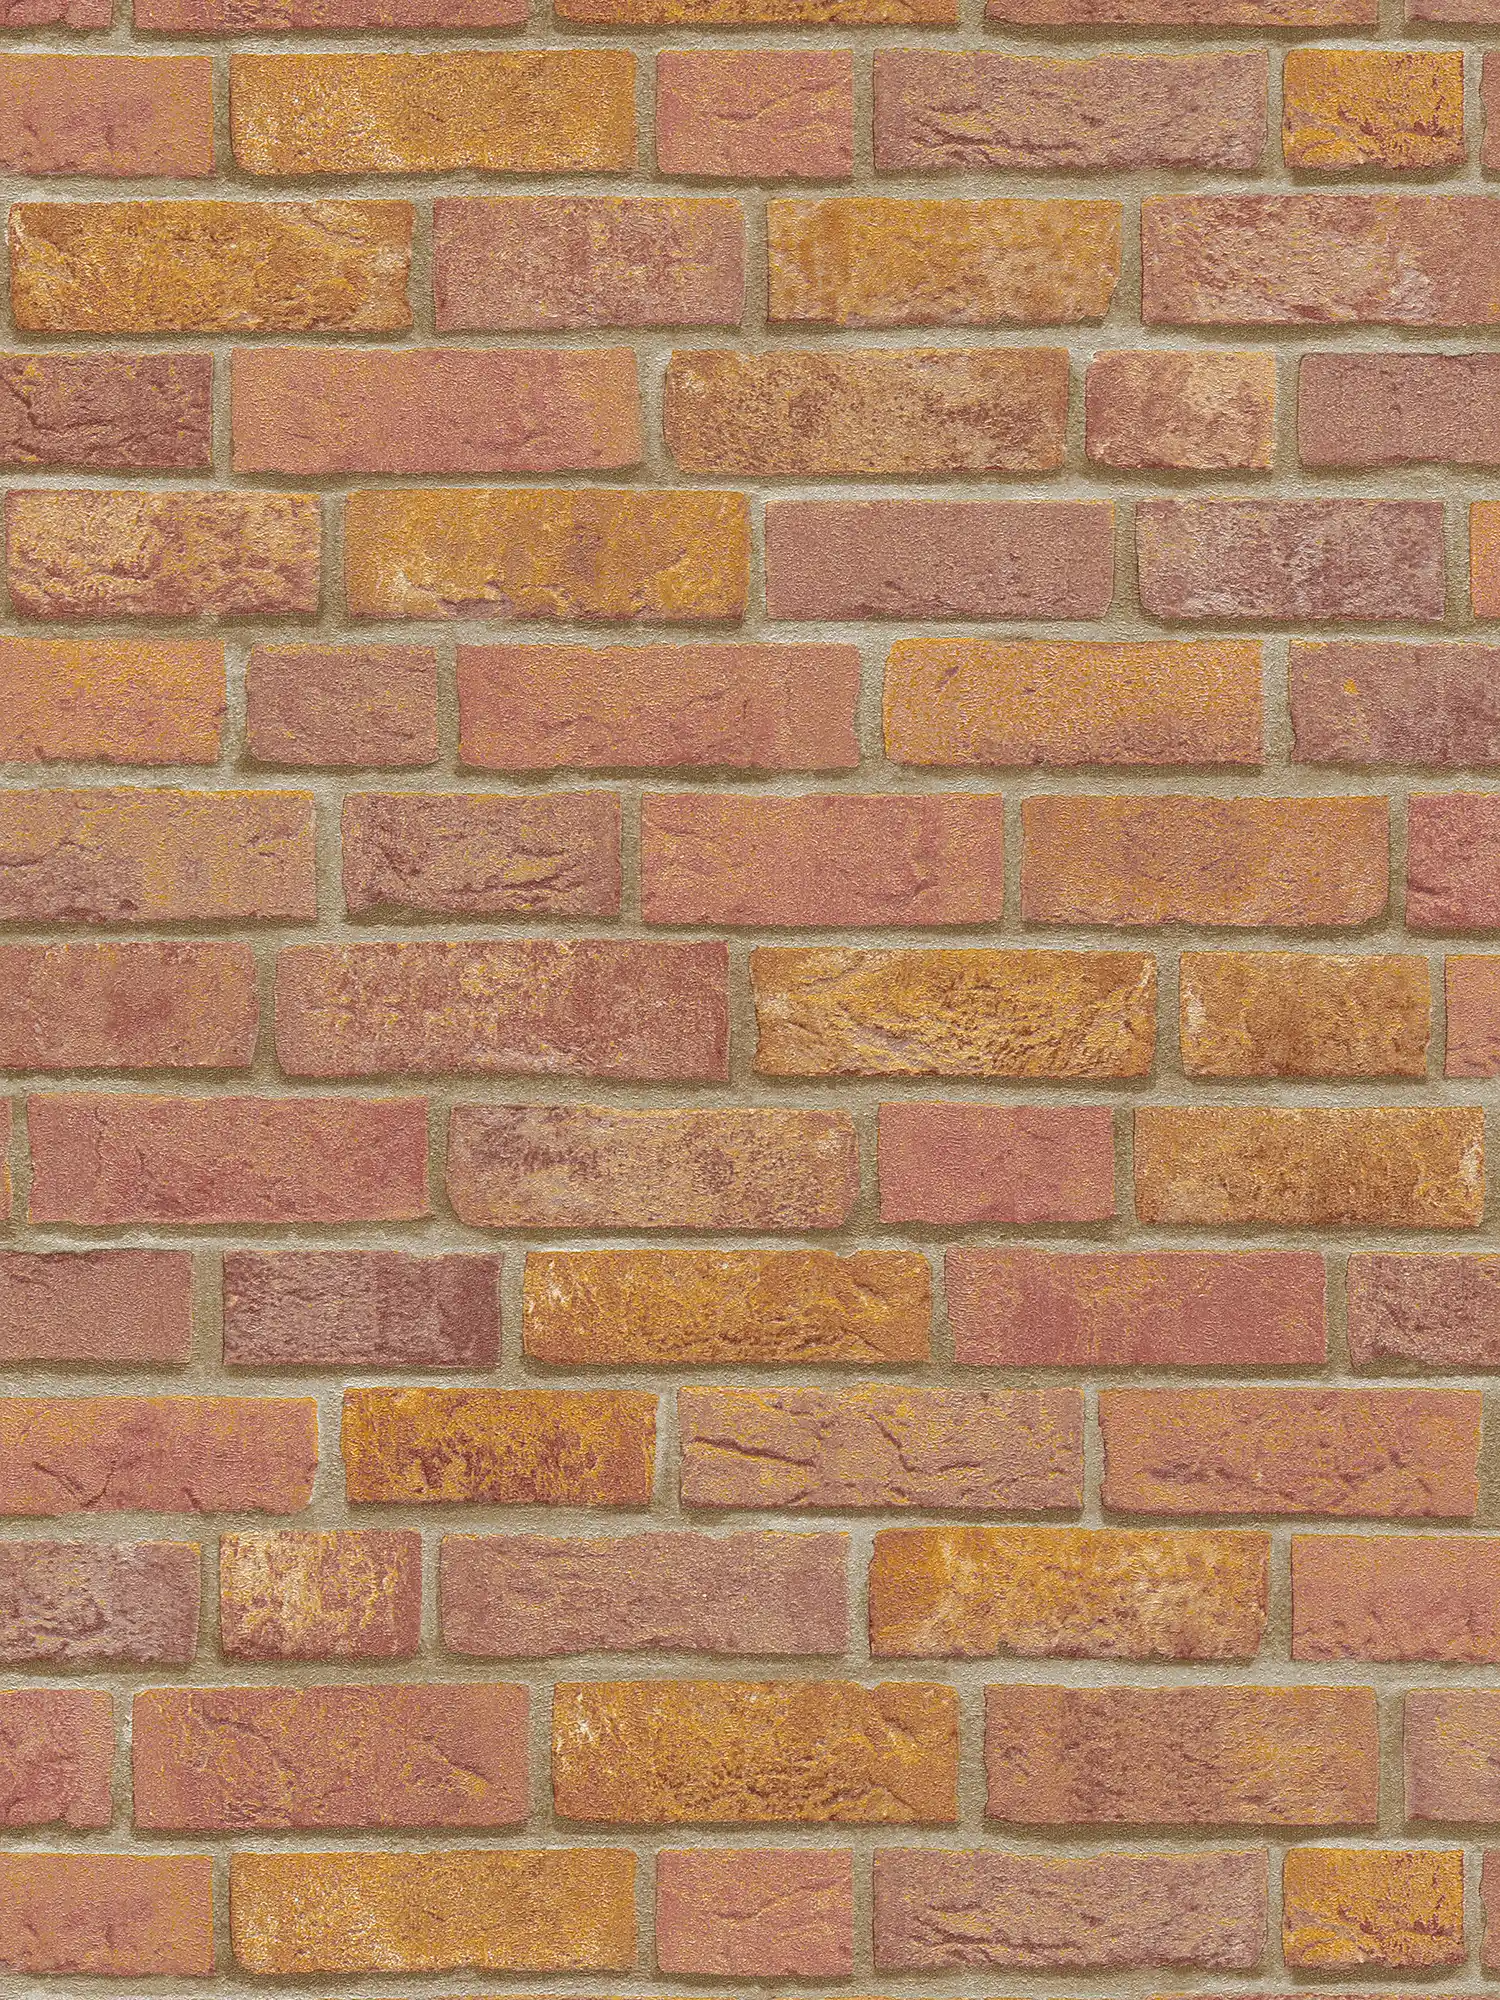 Brick wallpaper with 3D masonry look - red, brown
